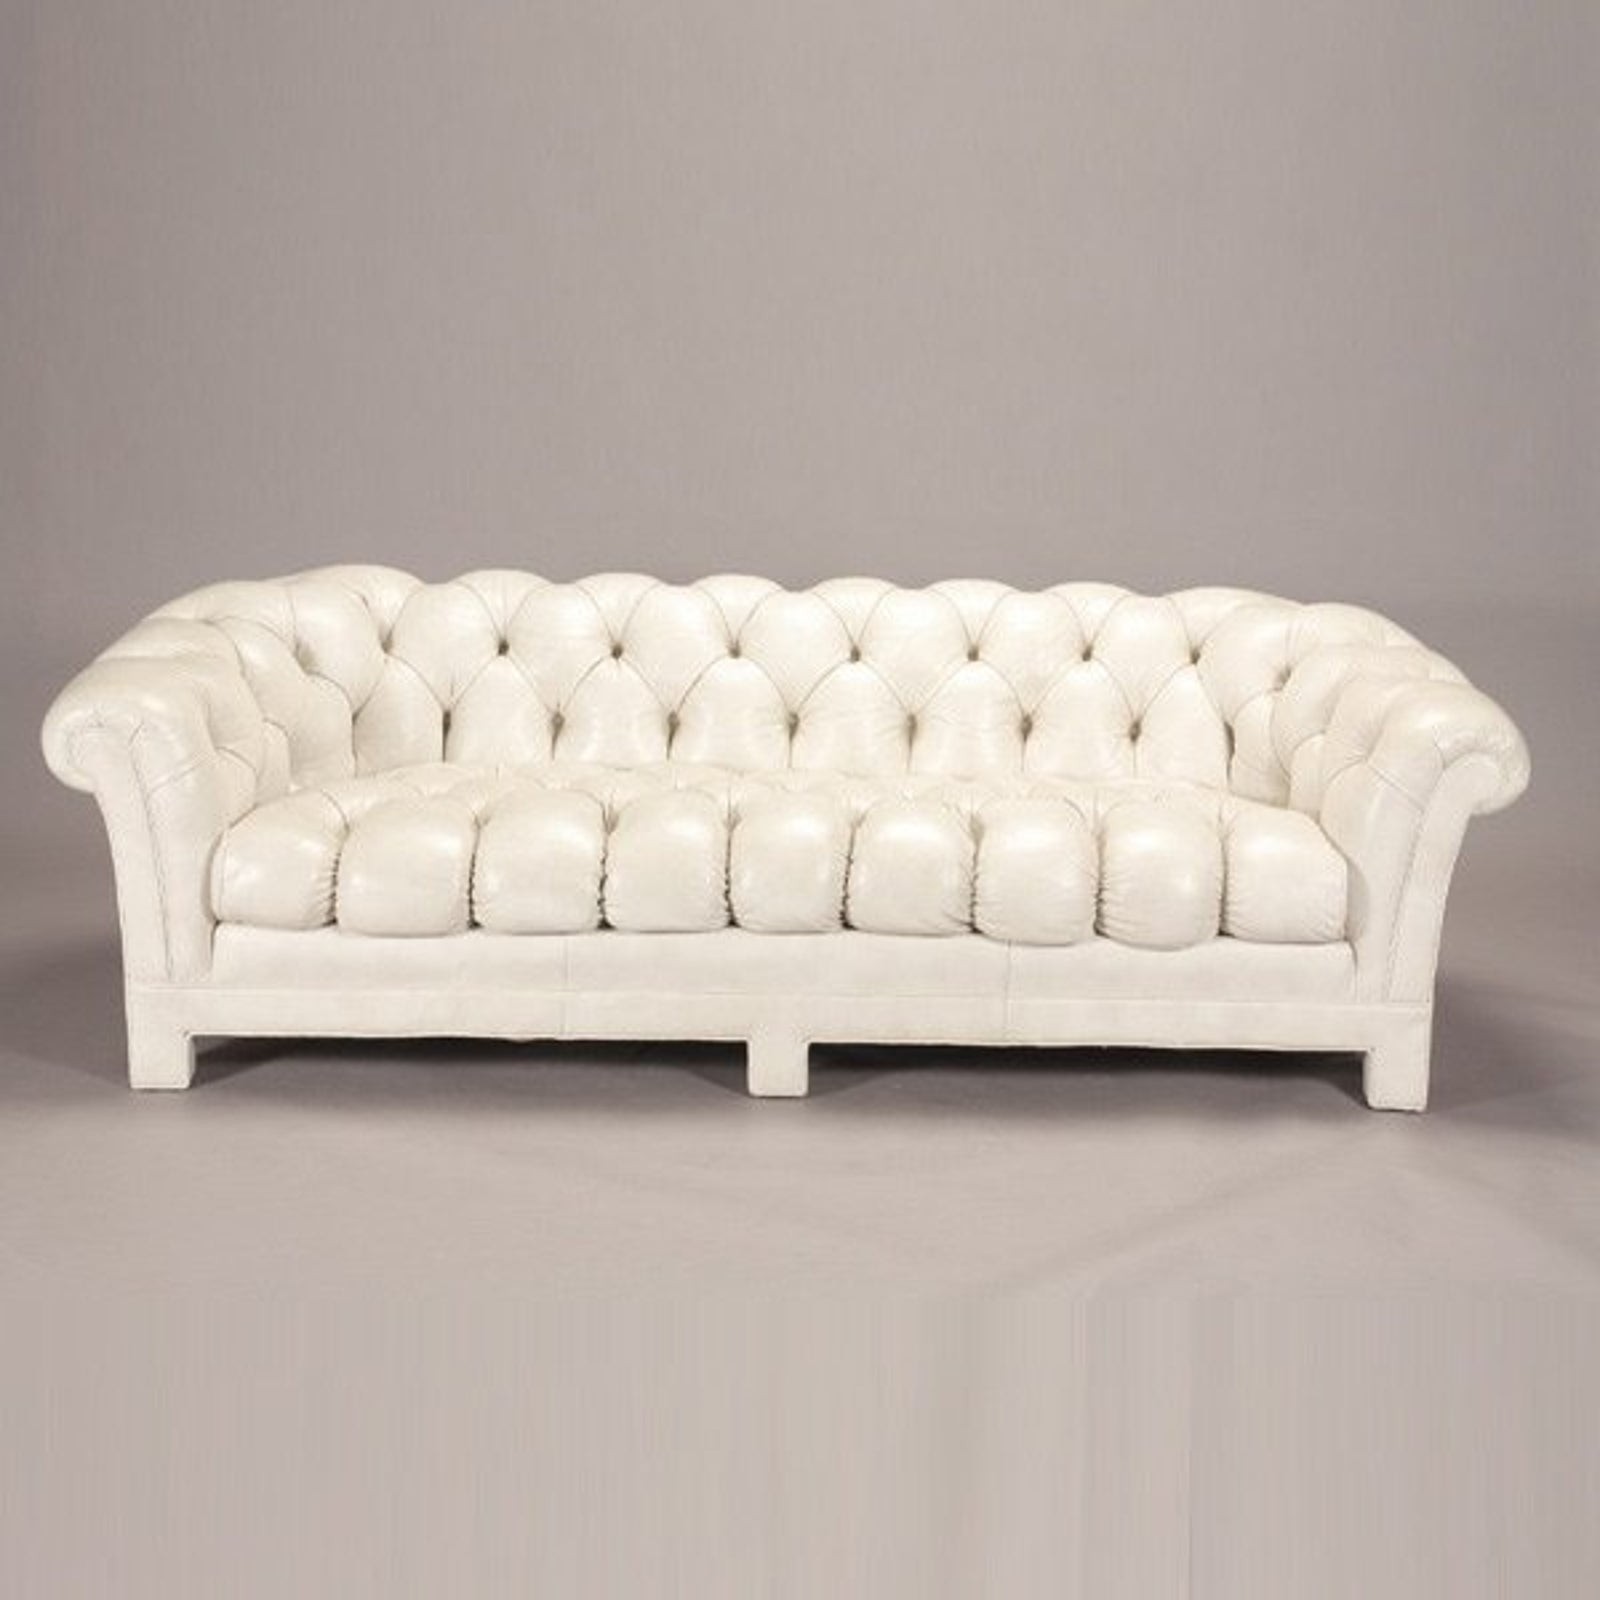 765 contemporary white tufted leather sofa